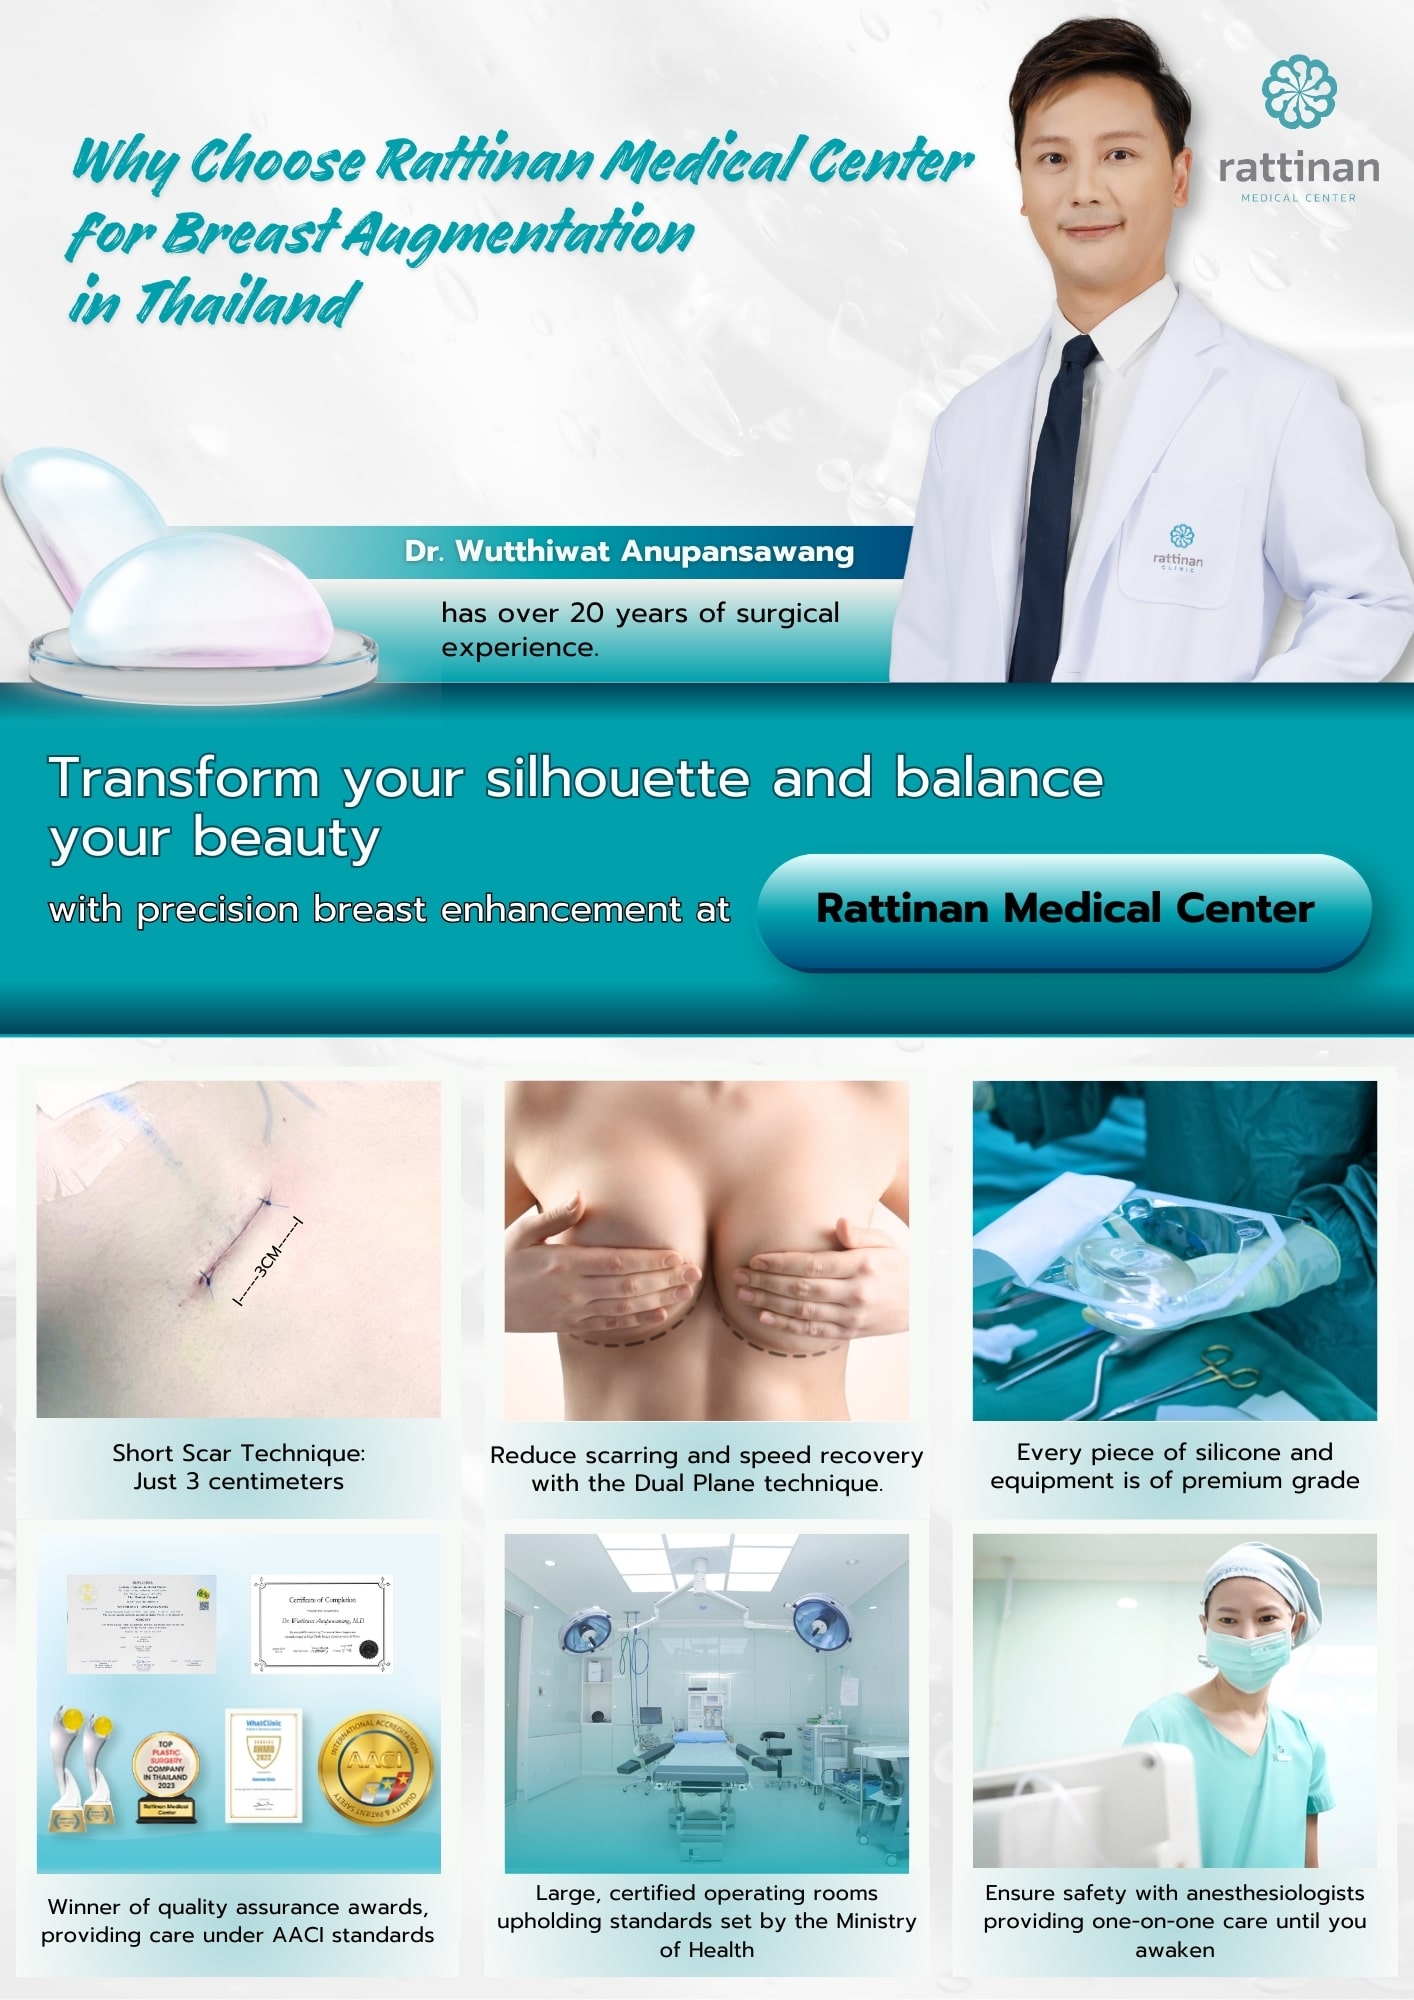 Why Choose Rattinan Medical Center for Breast Augmentation in Thailand